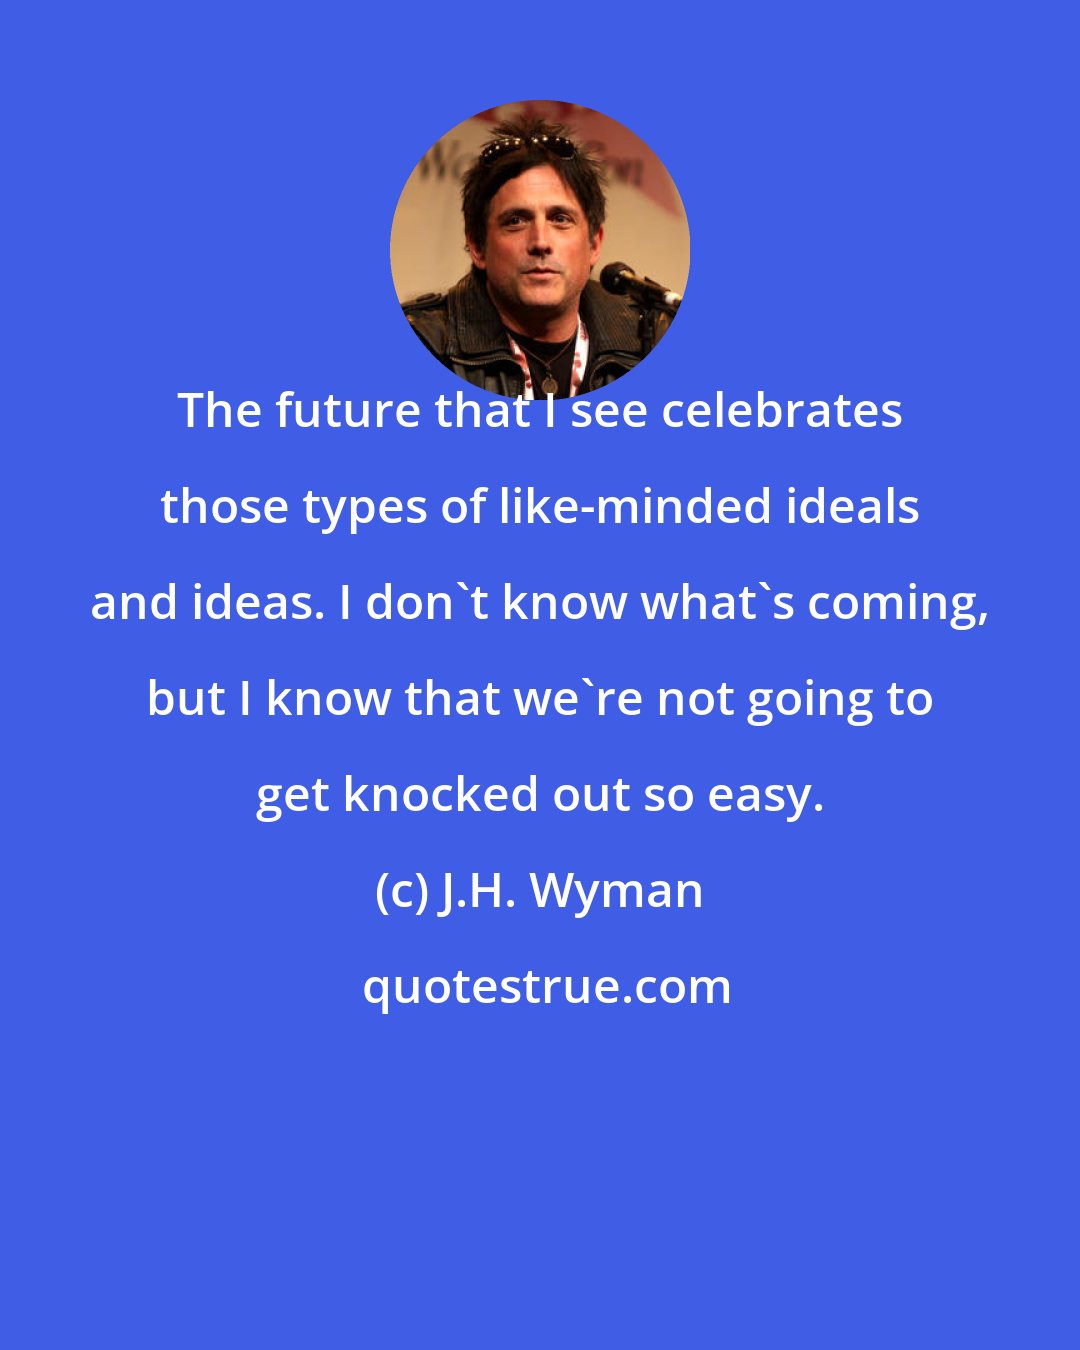 J.H. Wyman: The future that I see celebrates those types of like-minded ideals and ideas. I don't know what's coming, but I know that we're not going to get knocked out so easy.